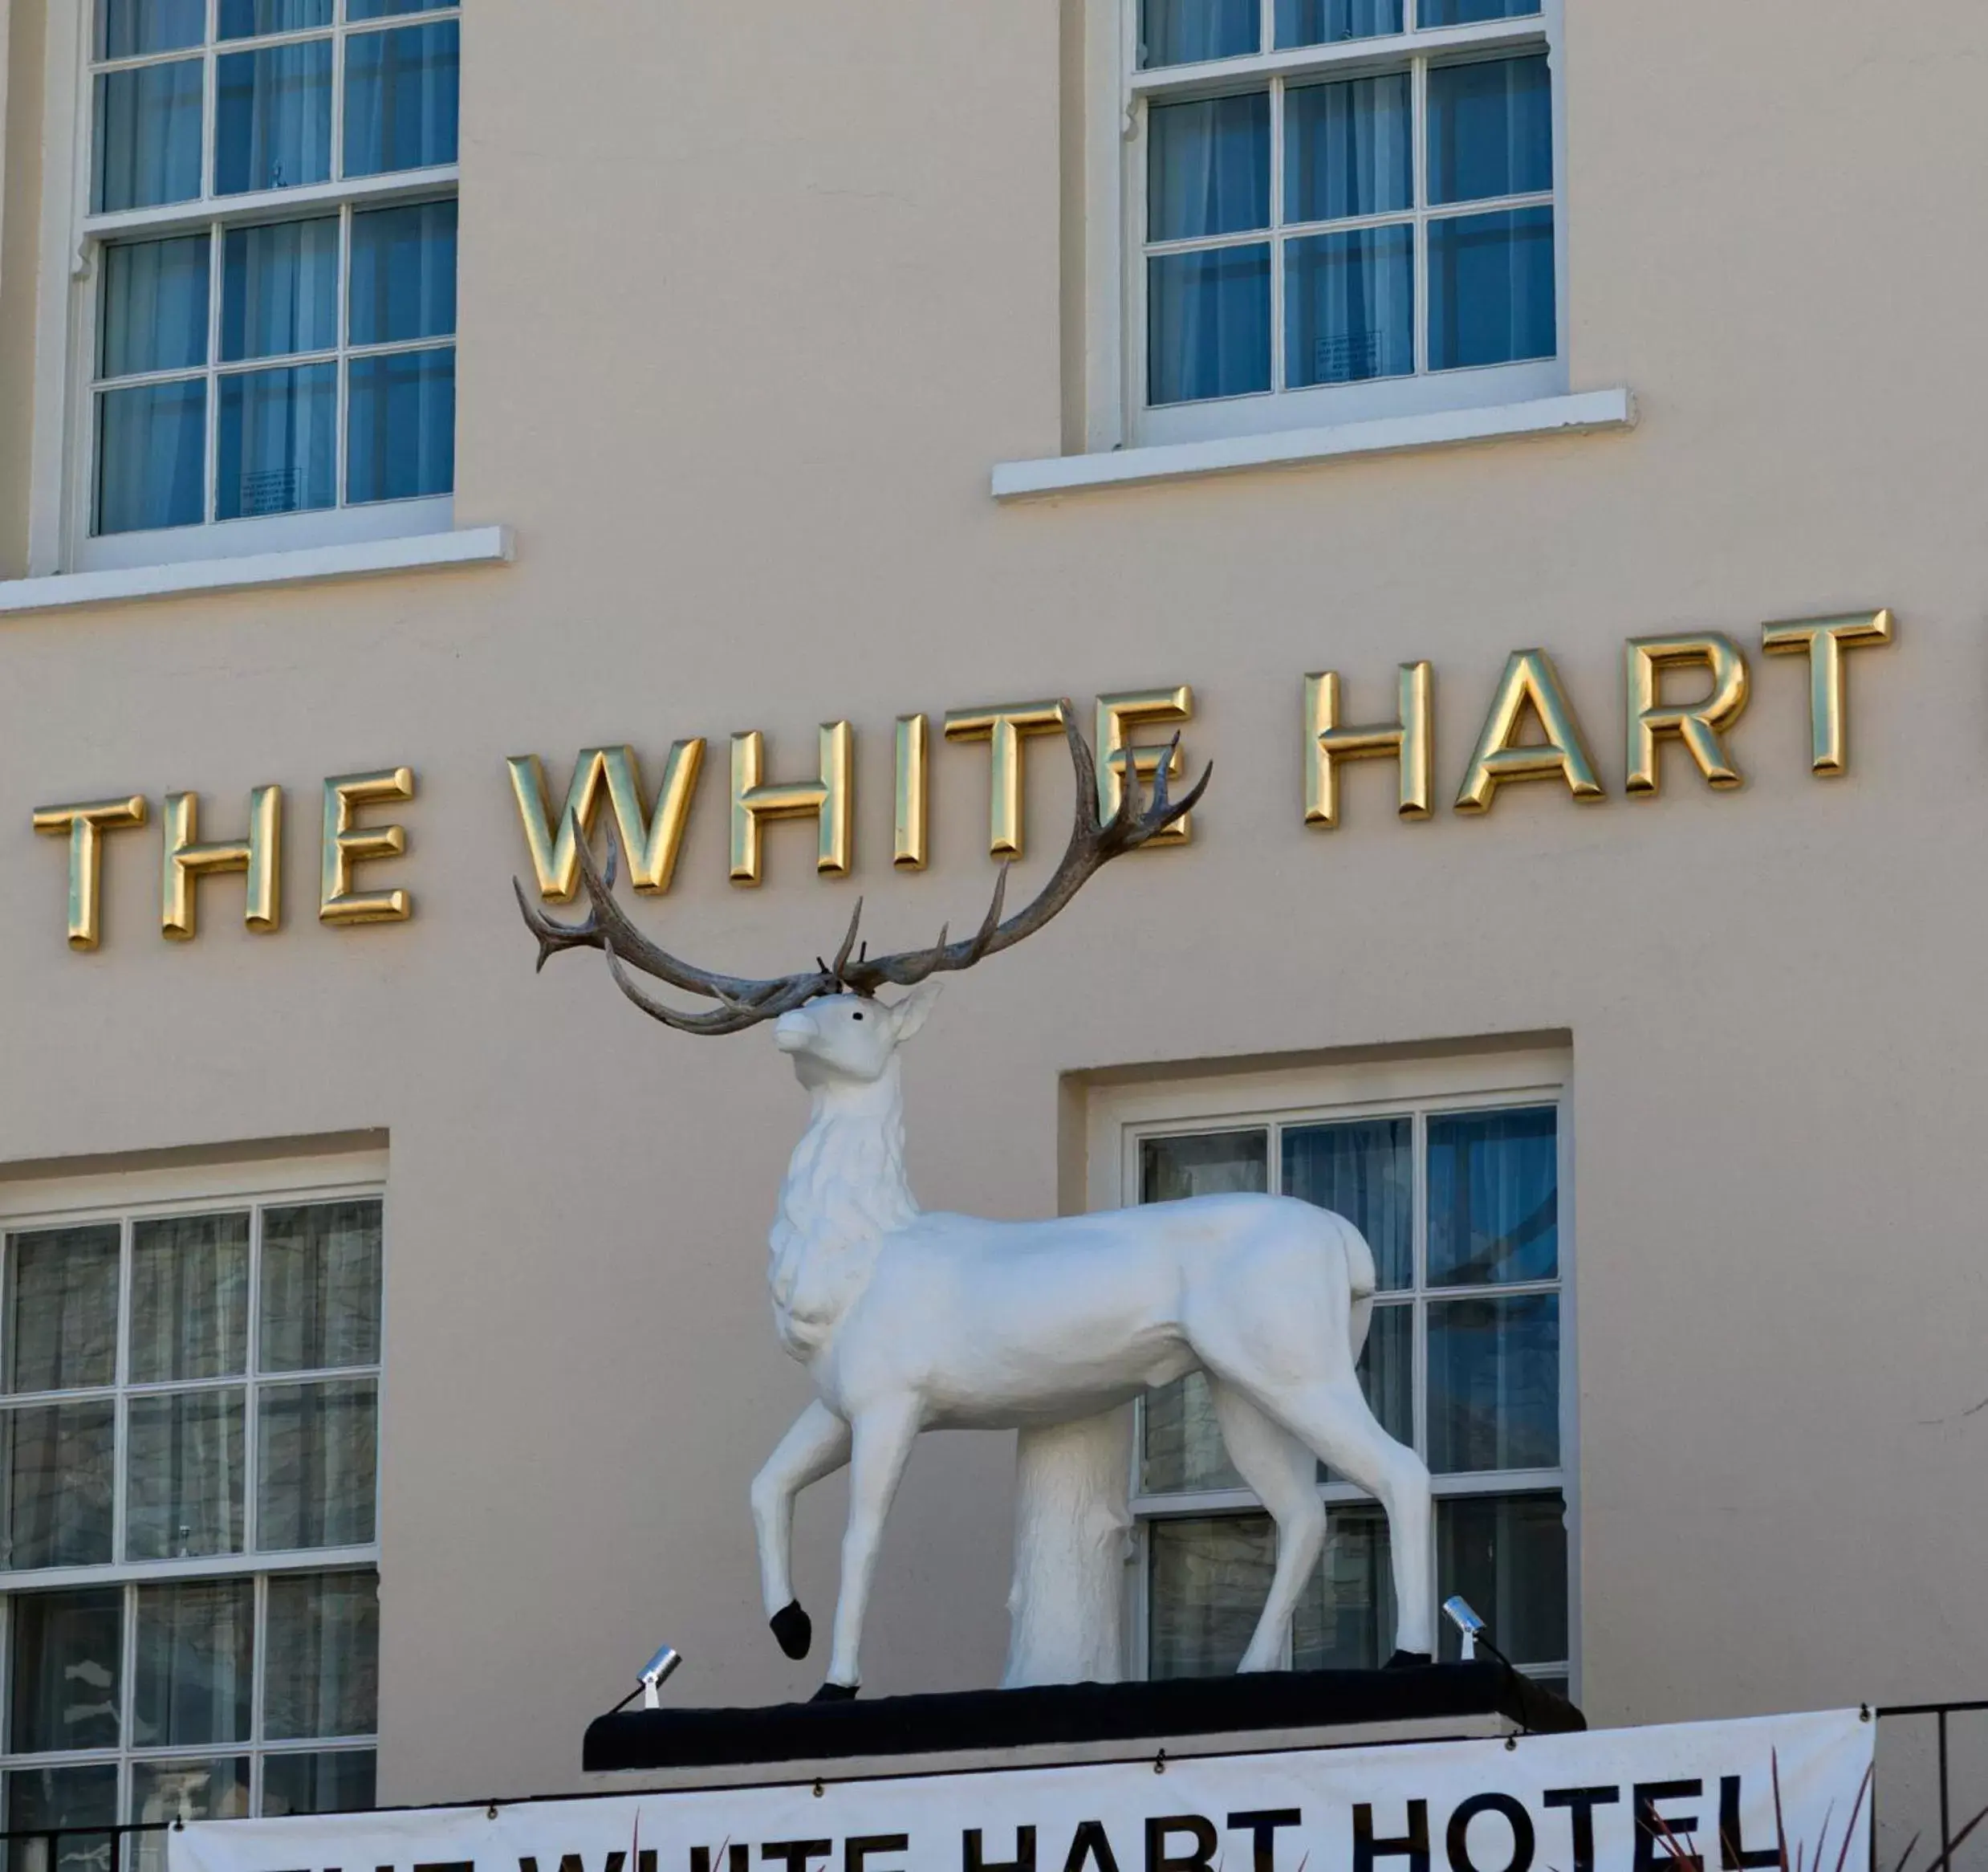 Property logo or sign, Facade/Entrance in The White Hart Hotel Wetherspoon